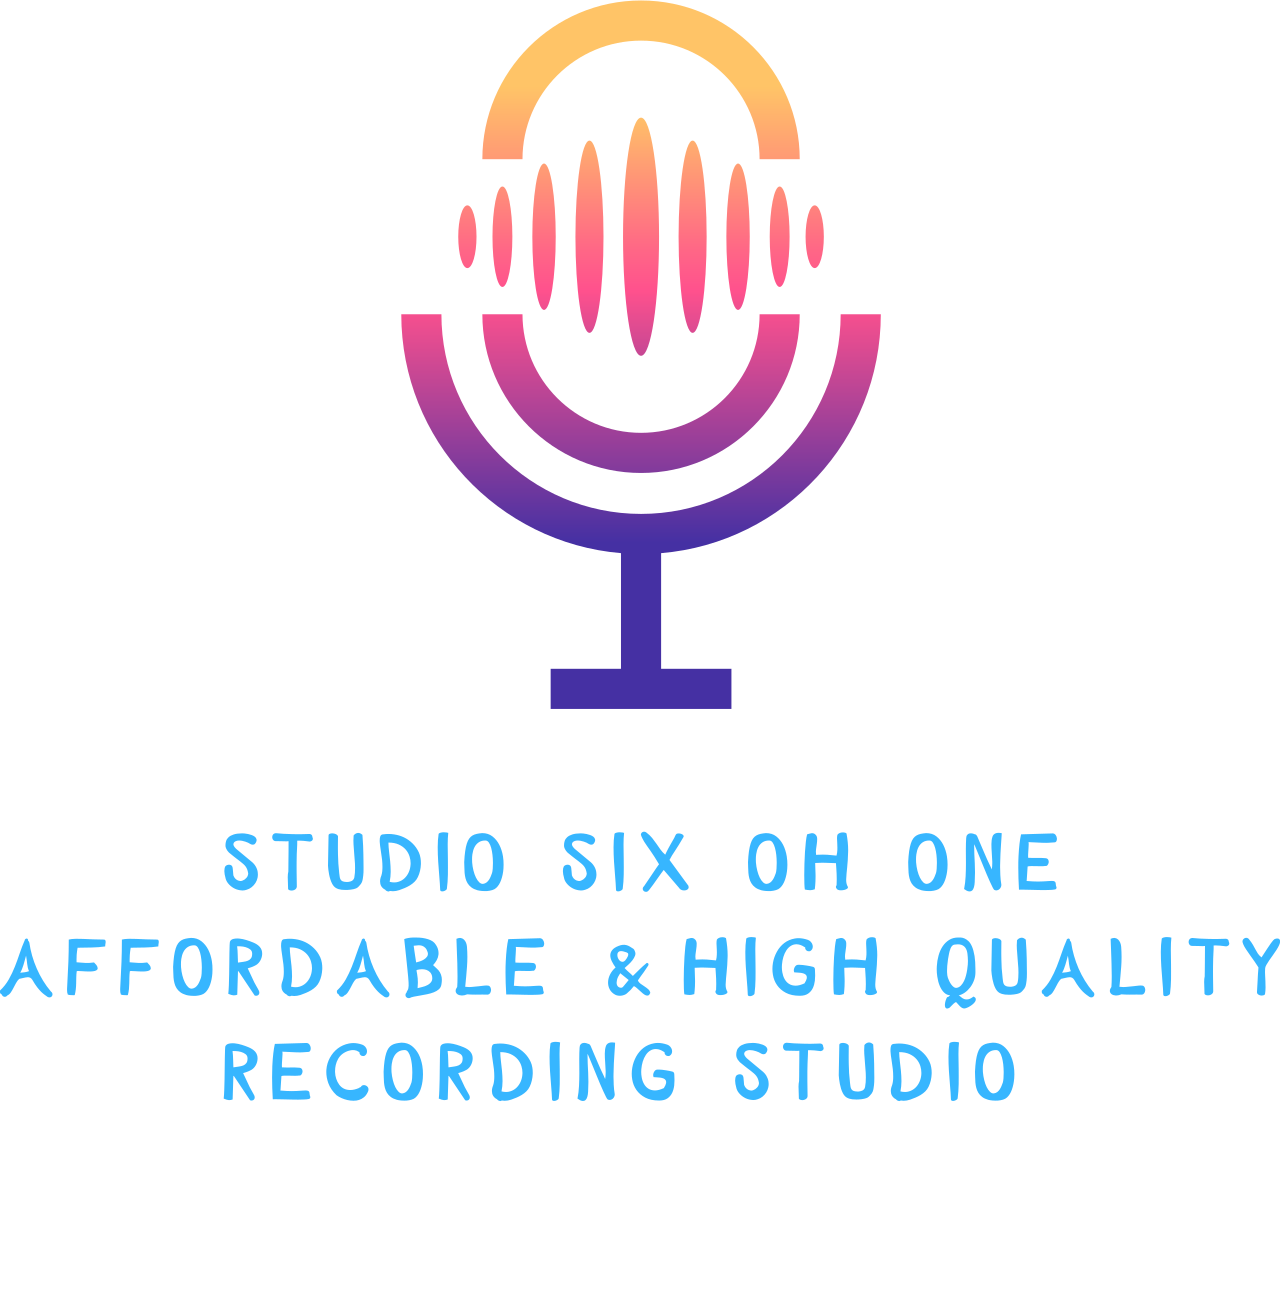 Studio Six Oh One
AFFORDABLE &HIGH QUALITY
RECORDING STUDIO 

's web page